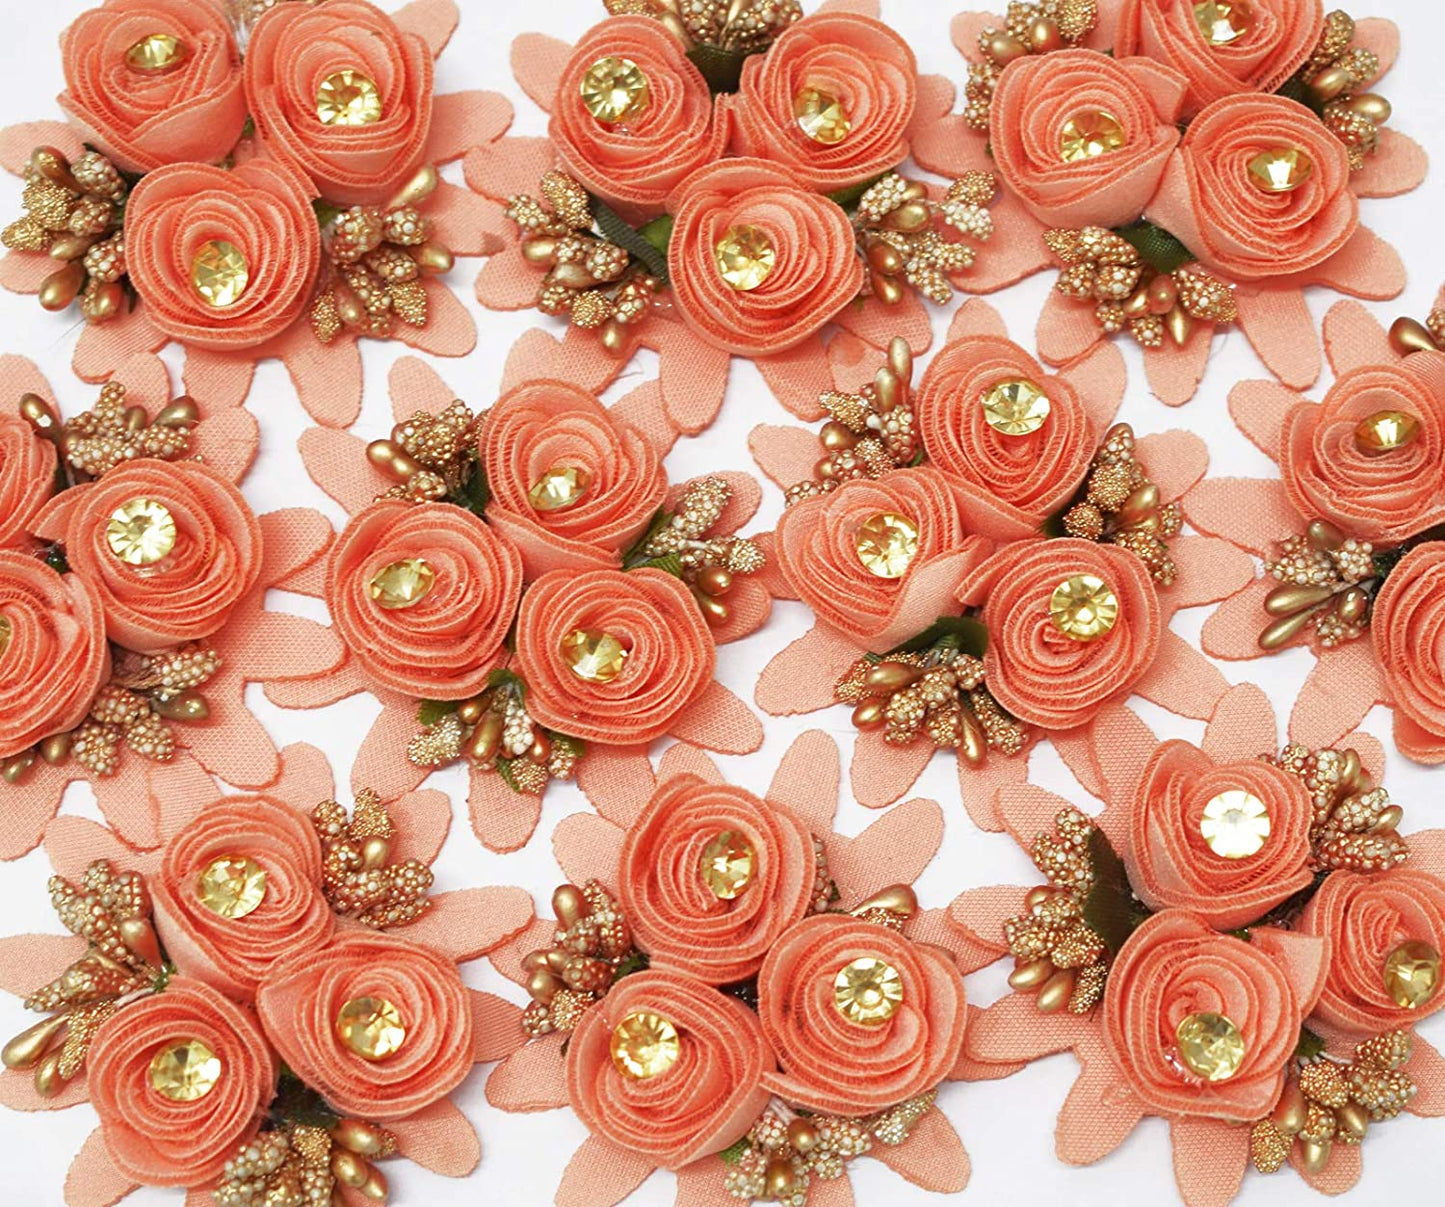 Fabric Flower Pack of 10 Pieces 6 CM